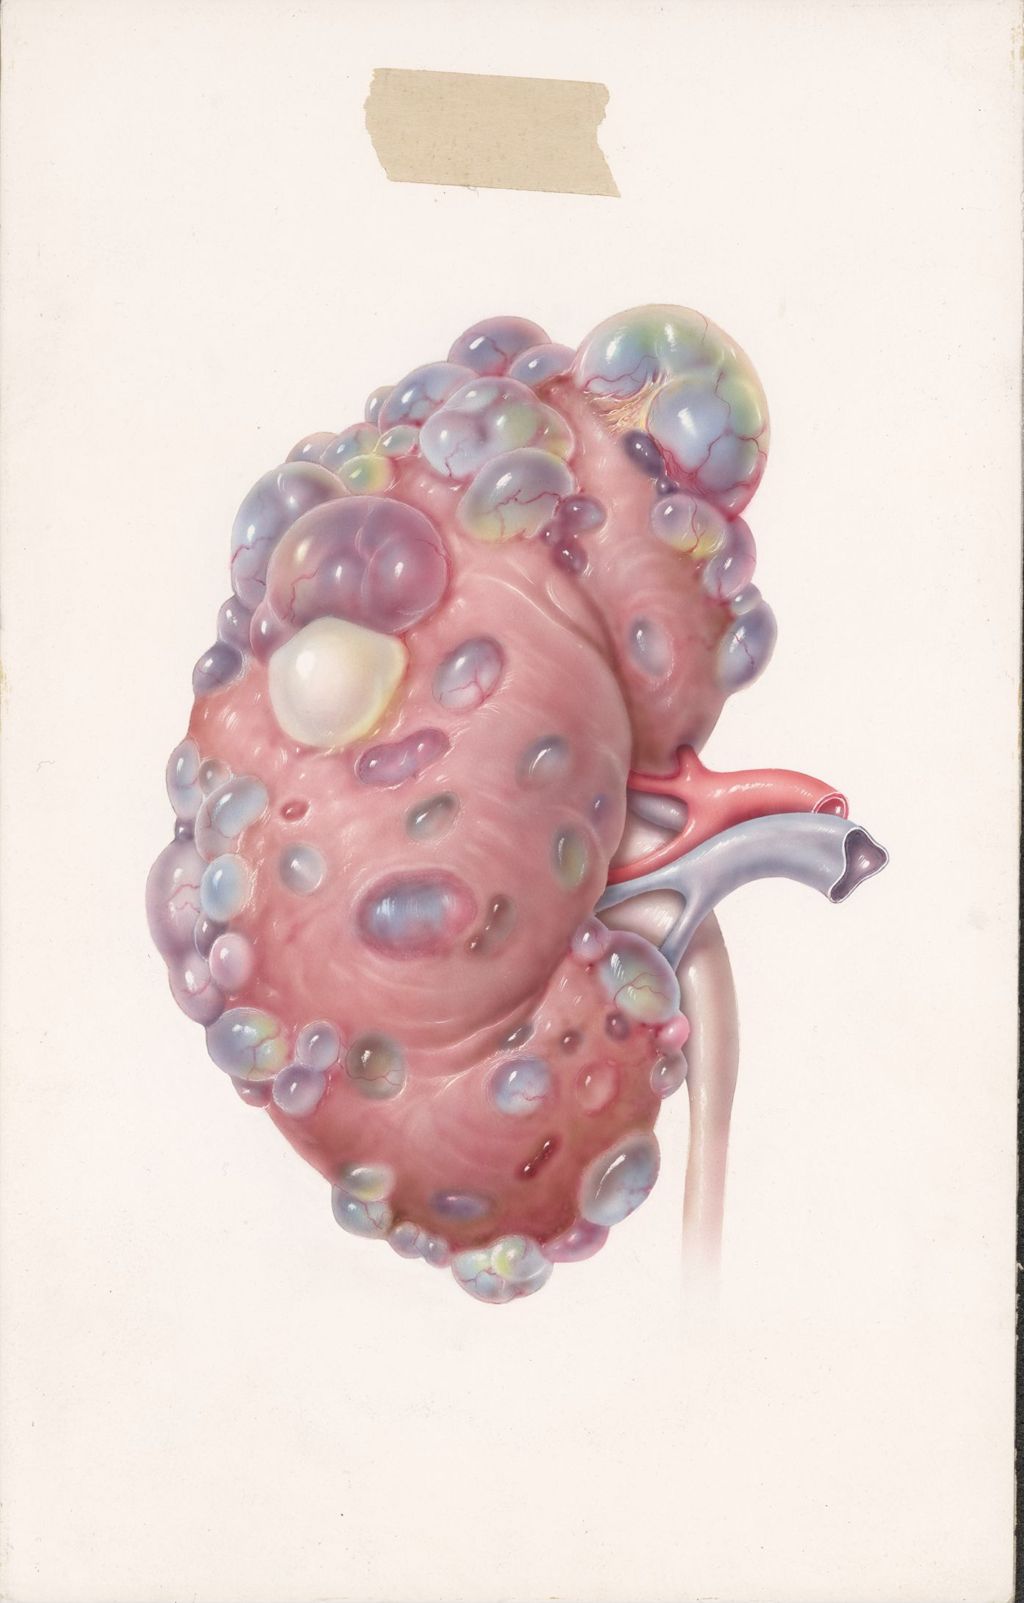 Miniature of Hypertension and the kidney, Diuril, Polycystic kidney disease